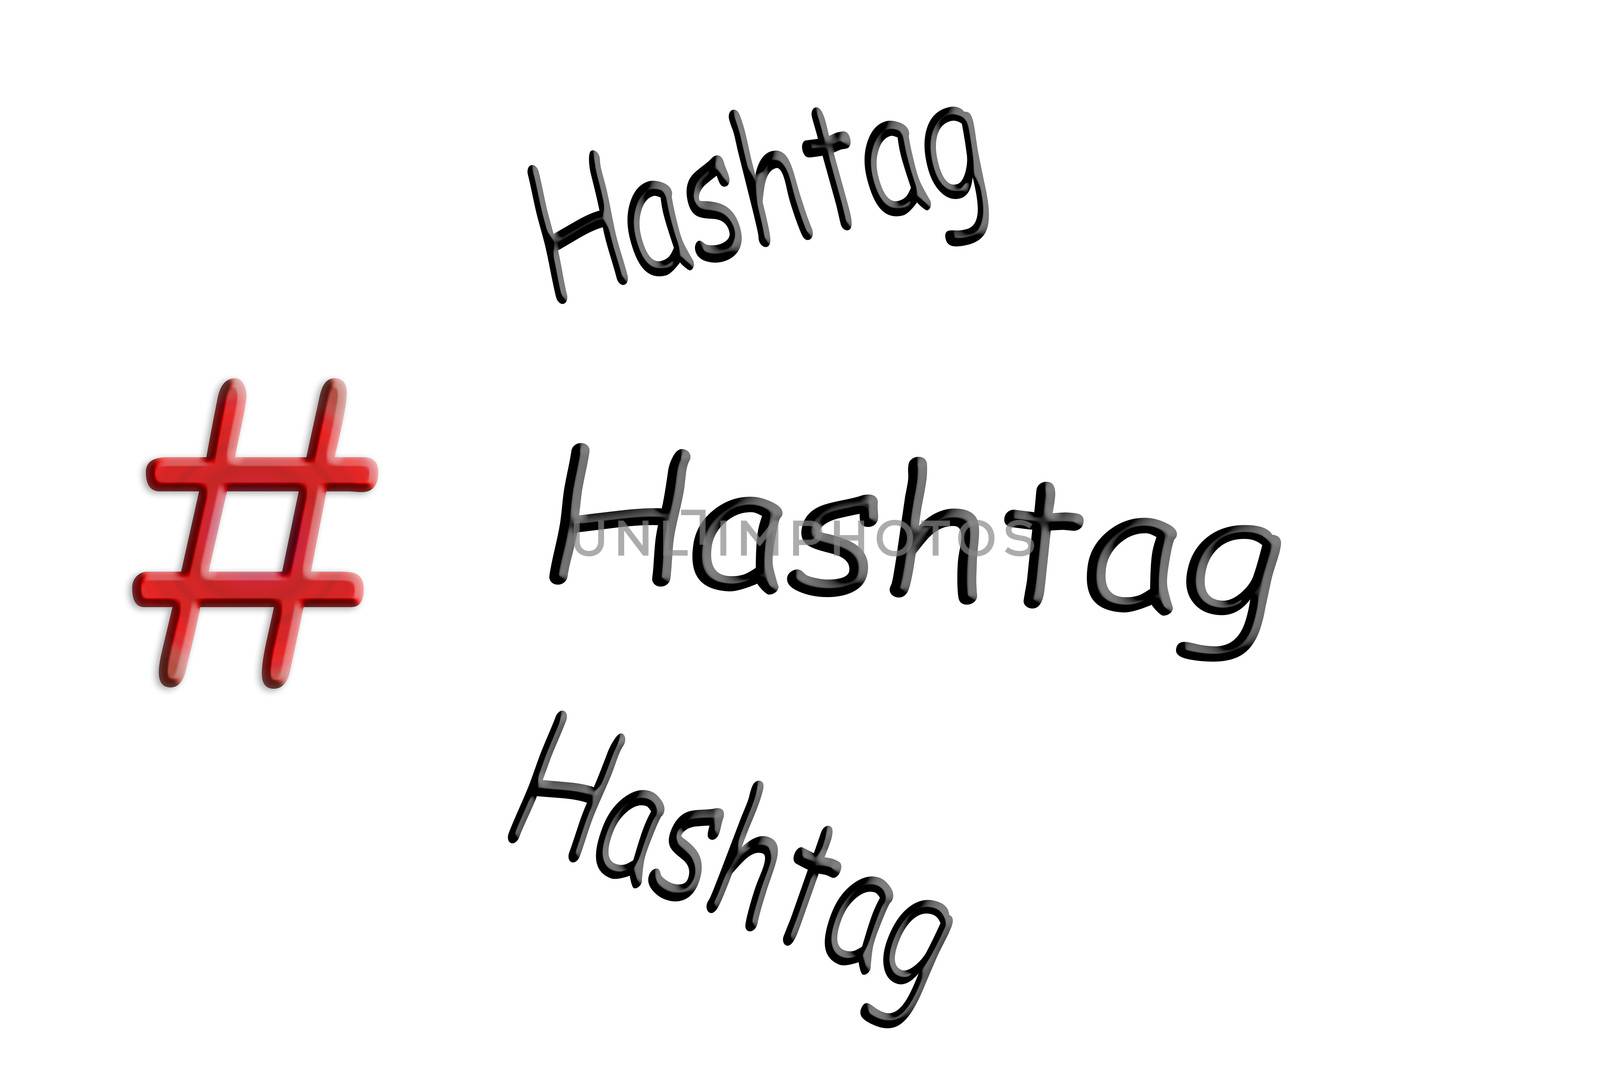 Internet and social media-trend theme # Hashtag sign on white background with caption Hashtag.